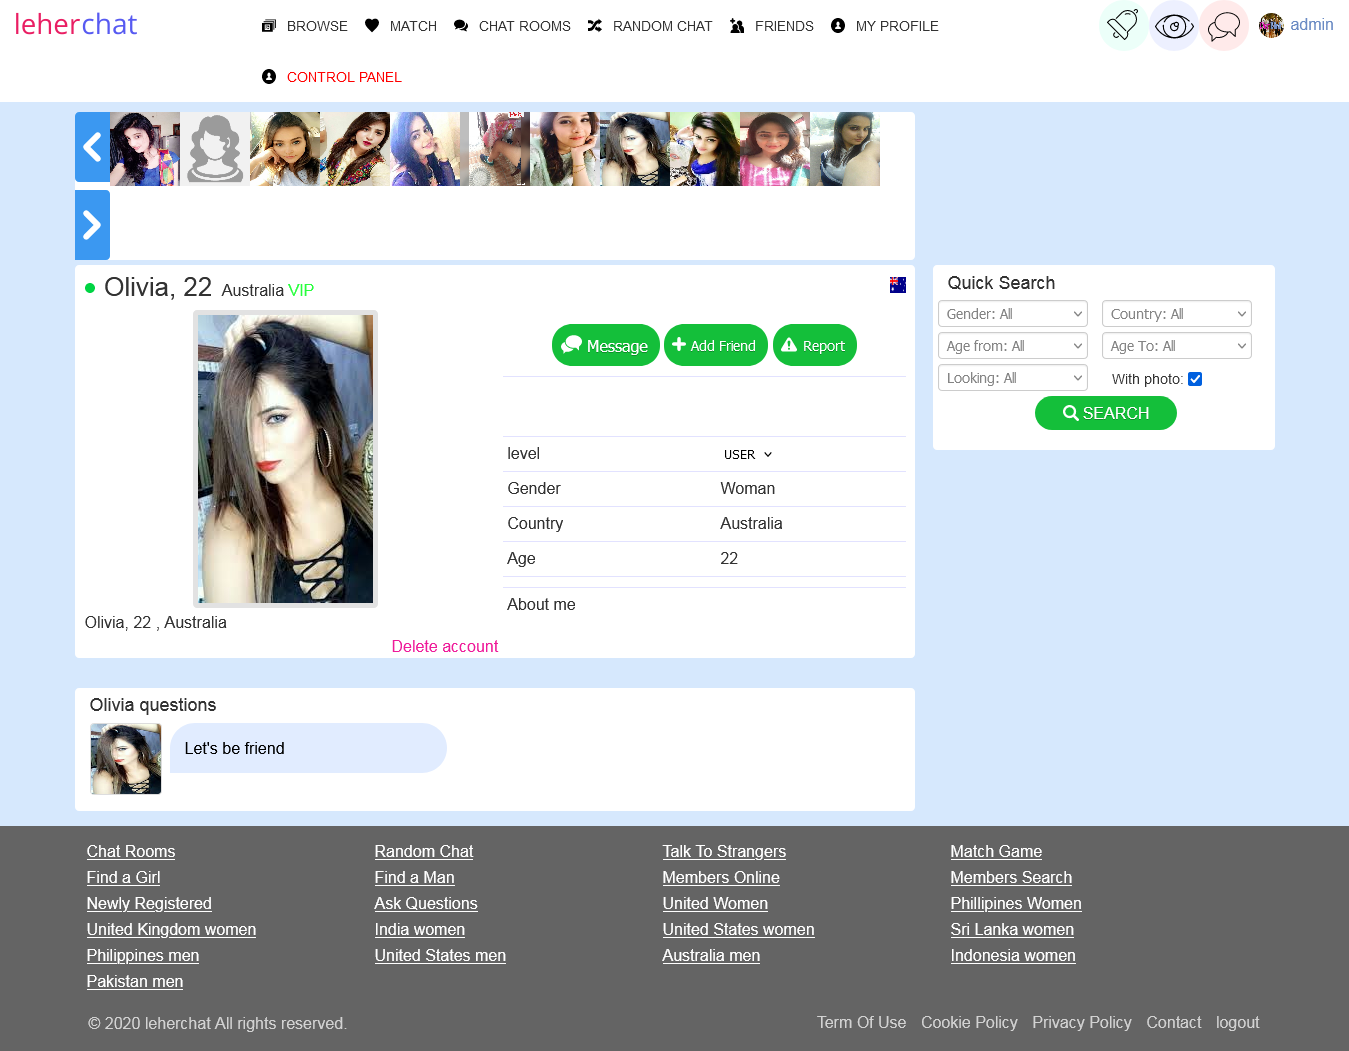 Group chat room website script with audio , video call.